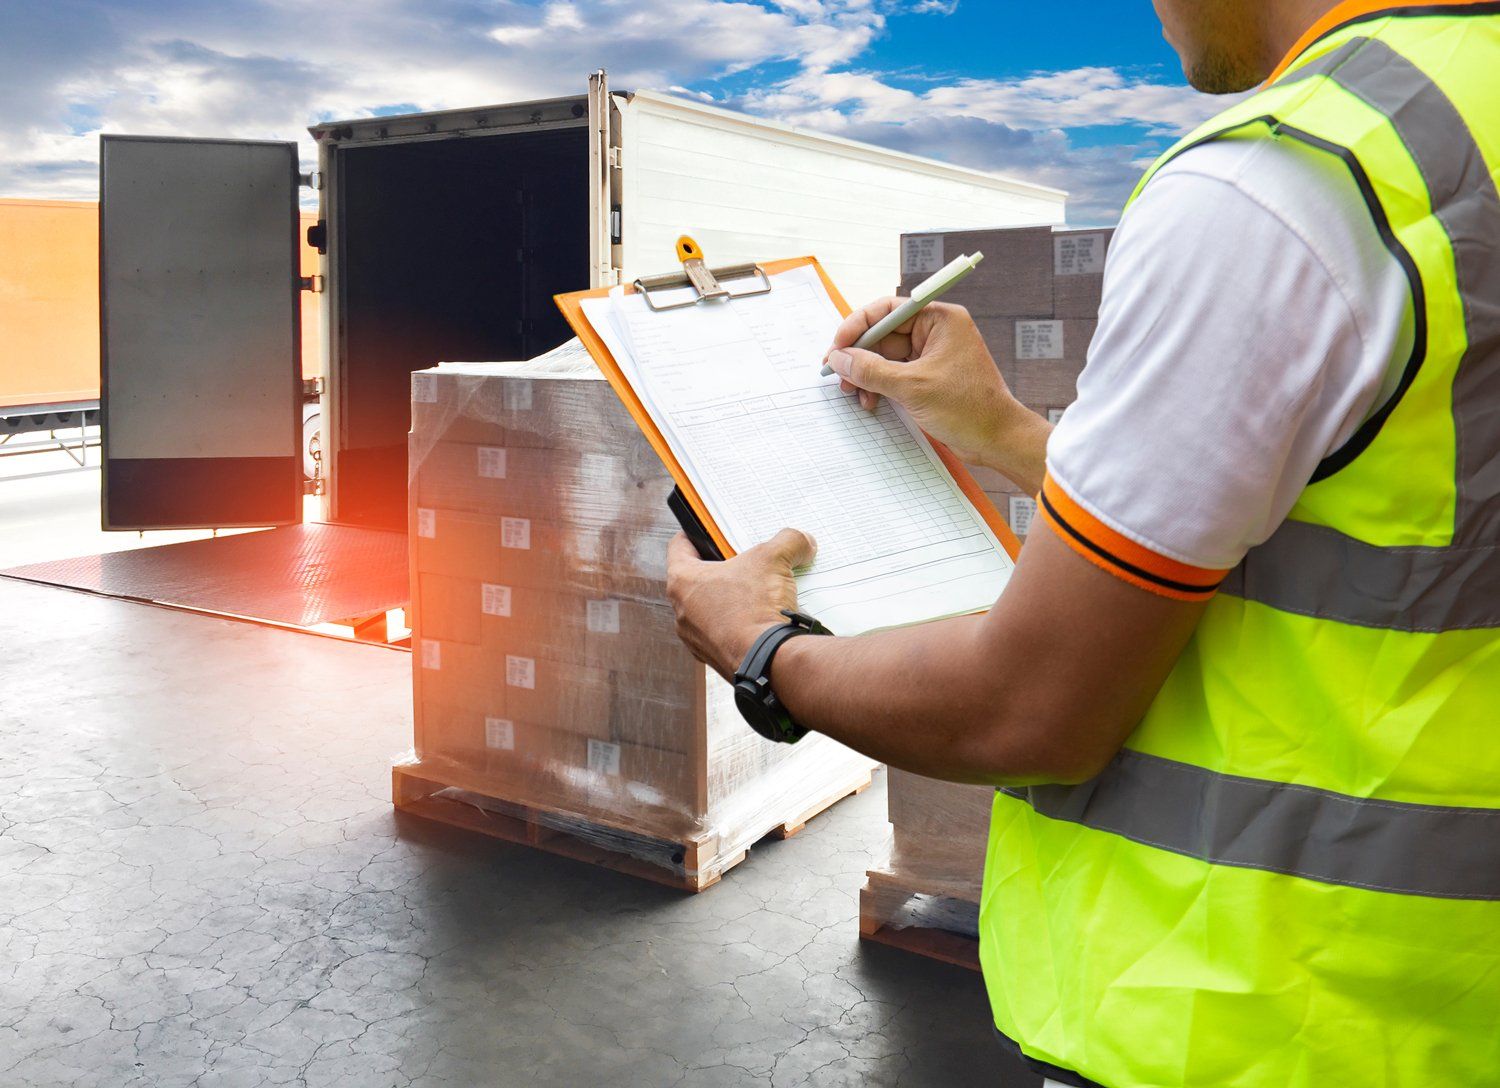 Returnable Assets and smart pallet tagging